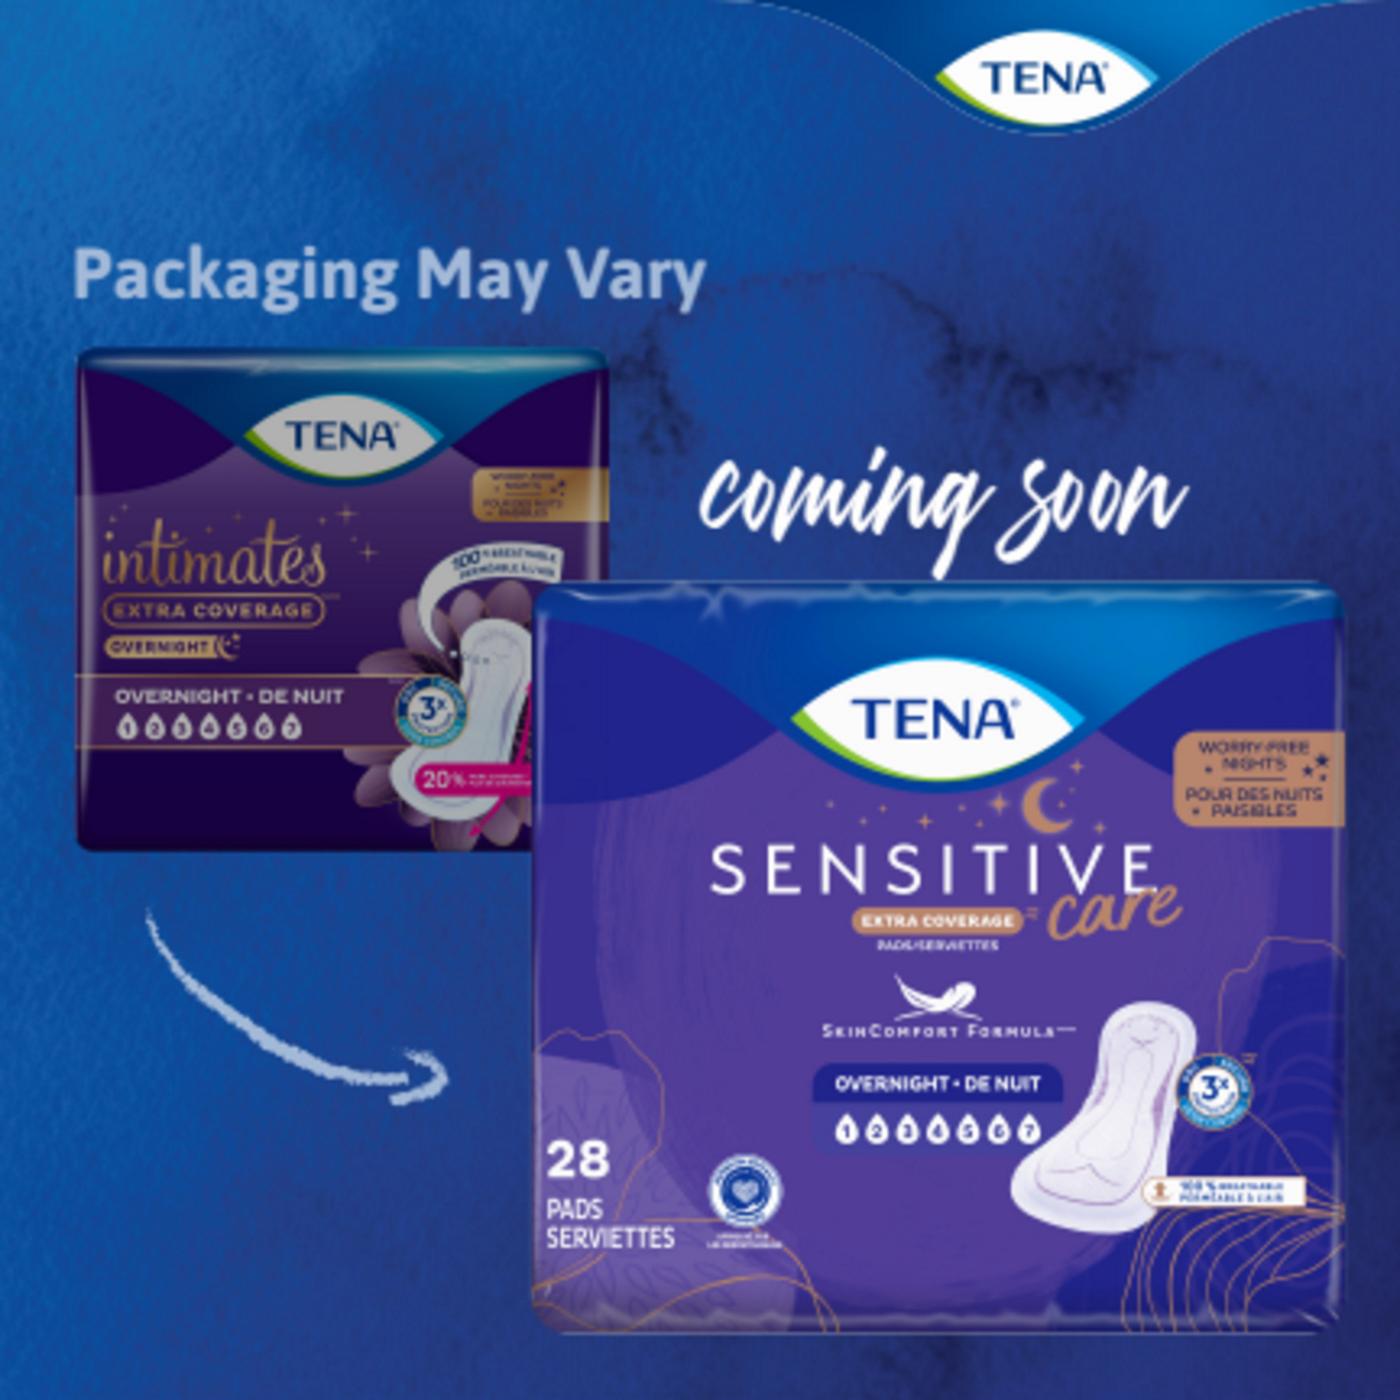 Tena Sensitive Care Extra Coverage Overnight Incontinence Pads; image 2 of 9